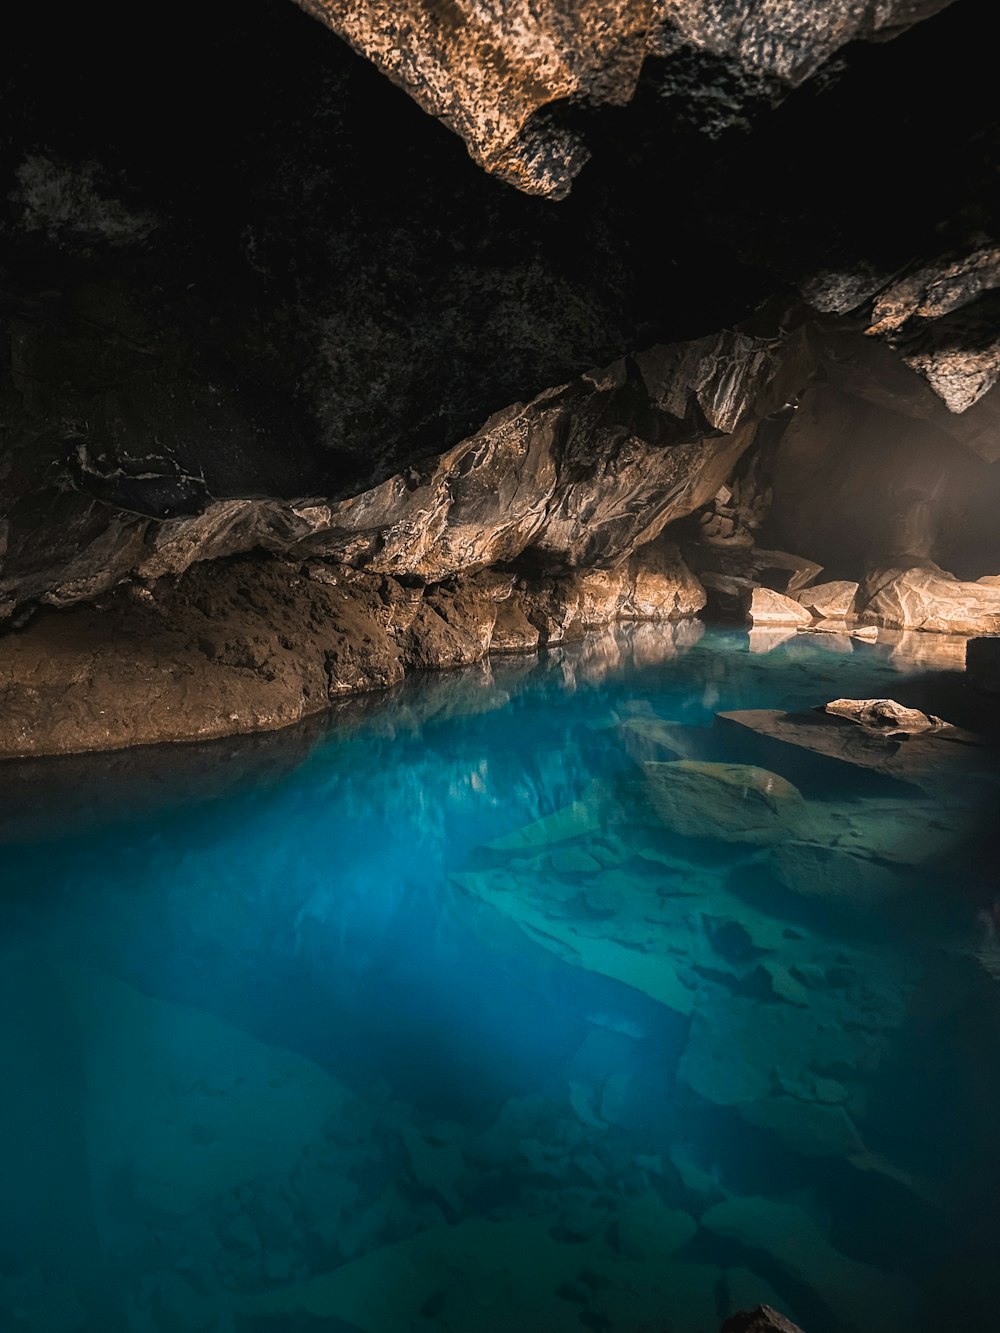 a large pool of water in a cave